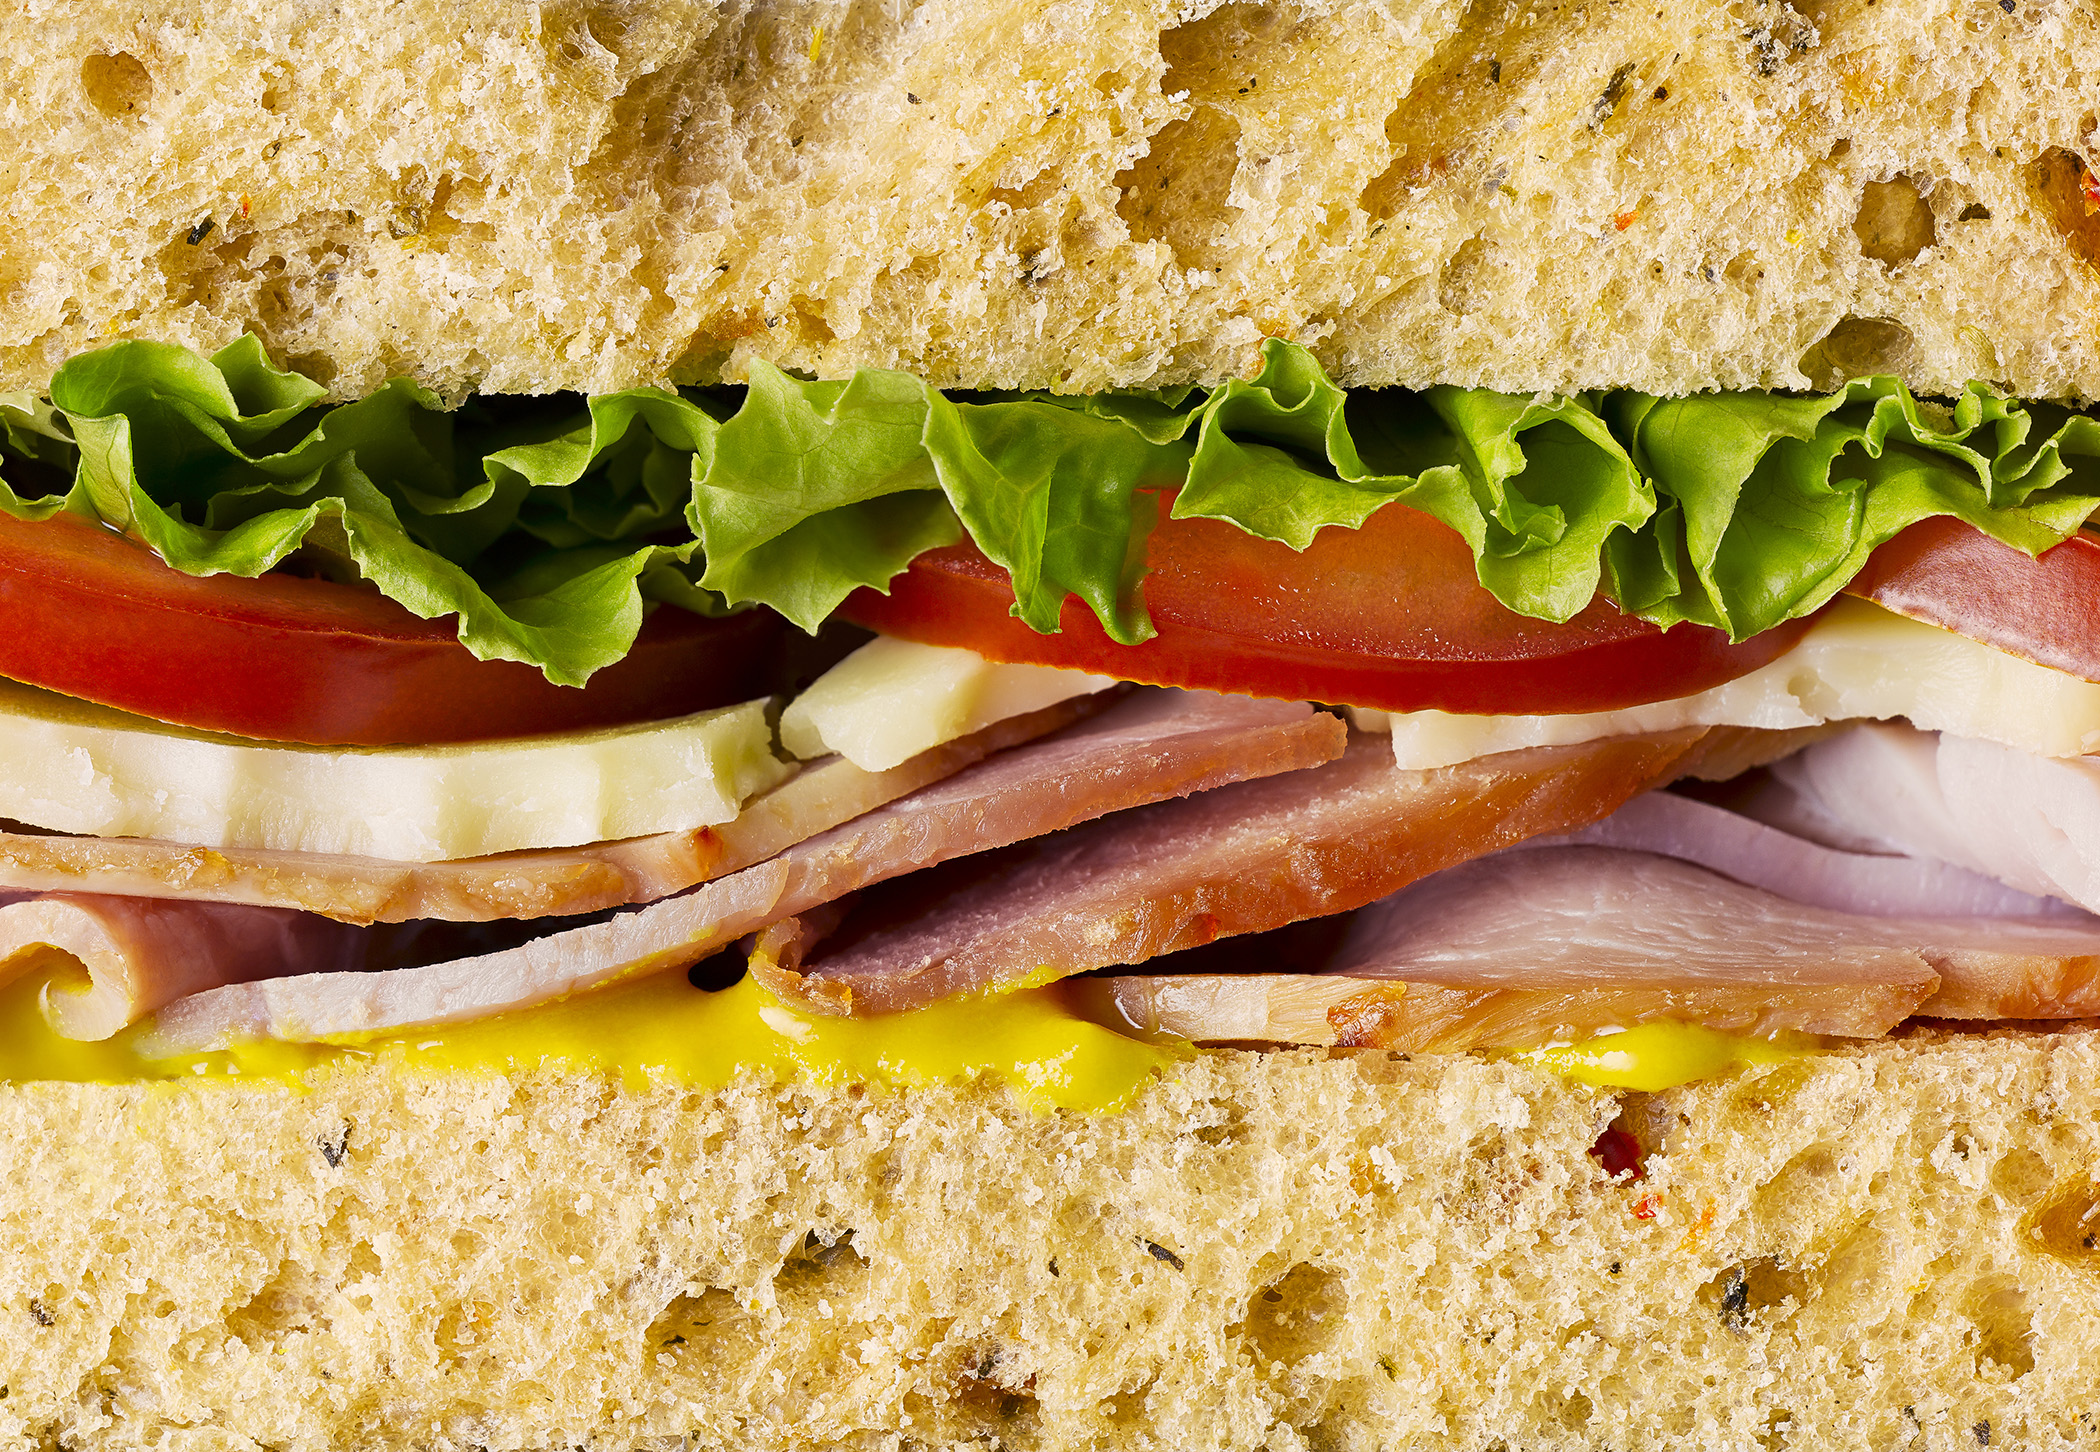 Making This Sandwich from Scratch Takes Six Months and Costs $1,500